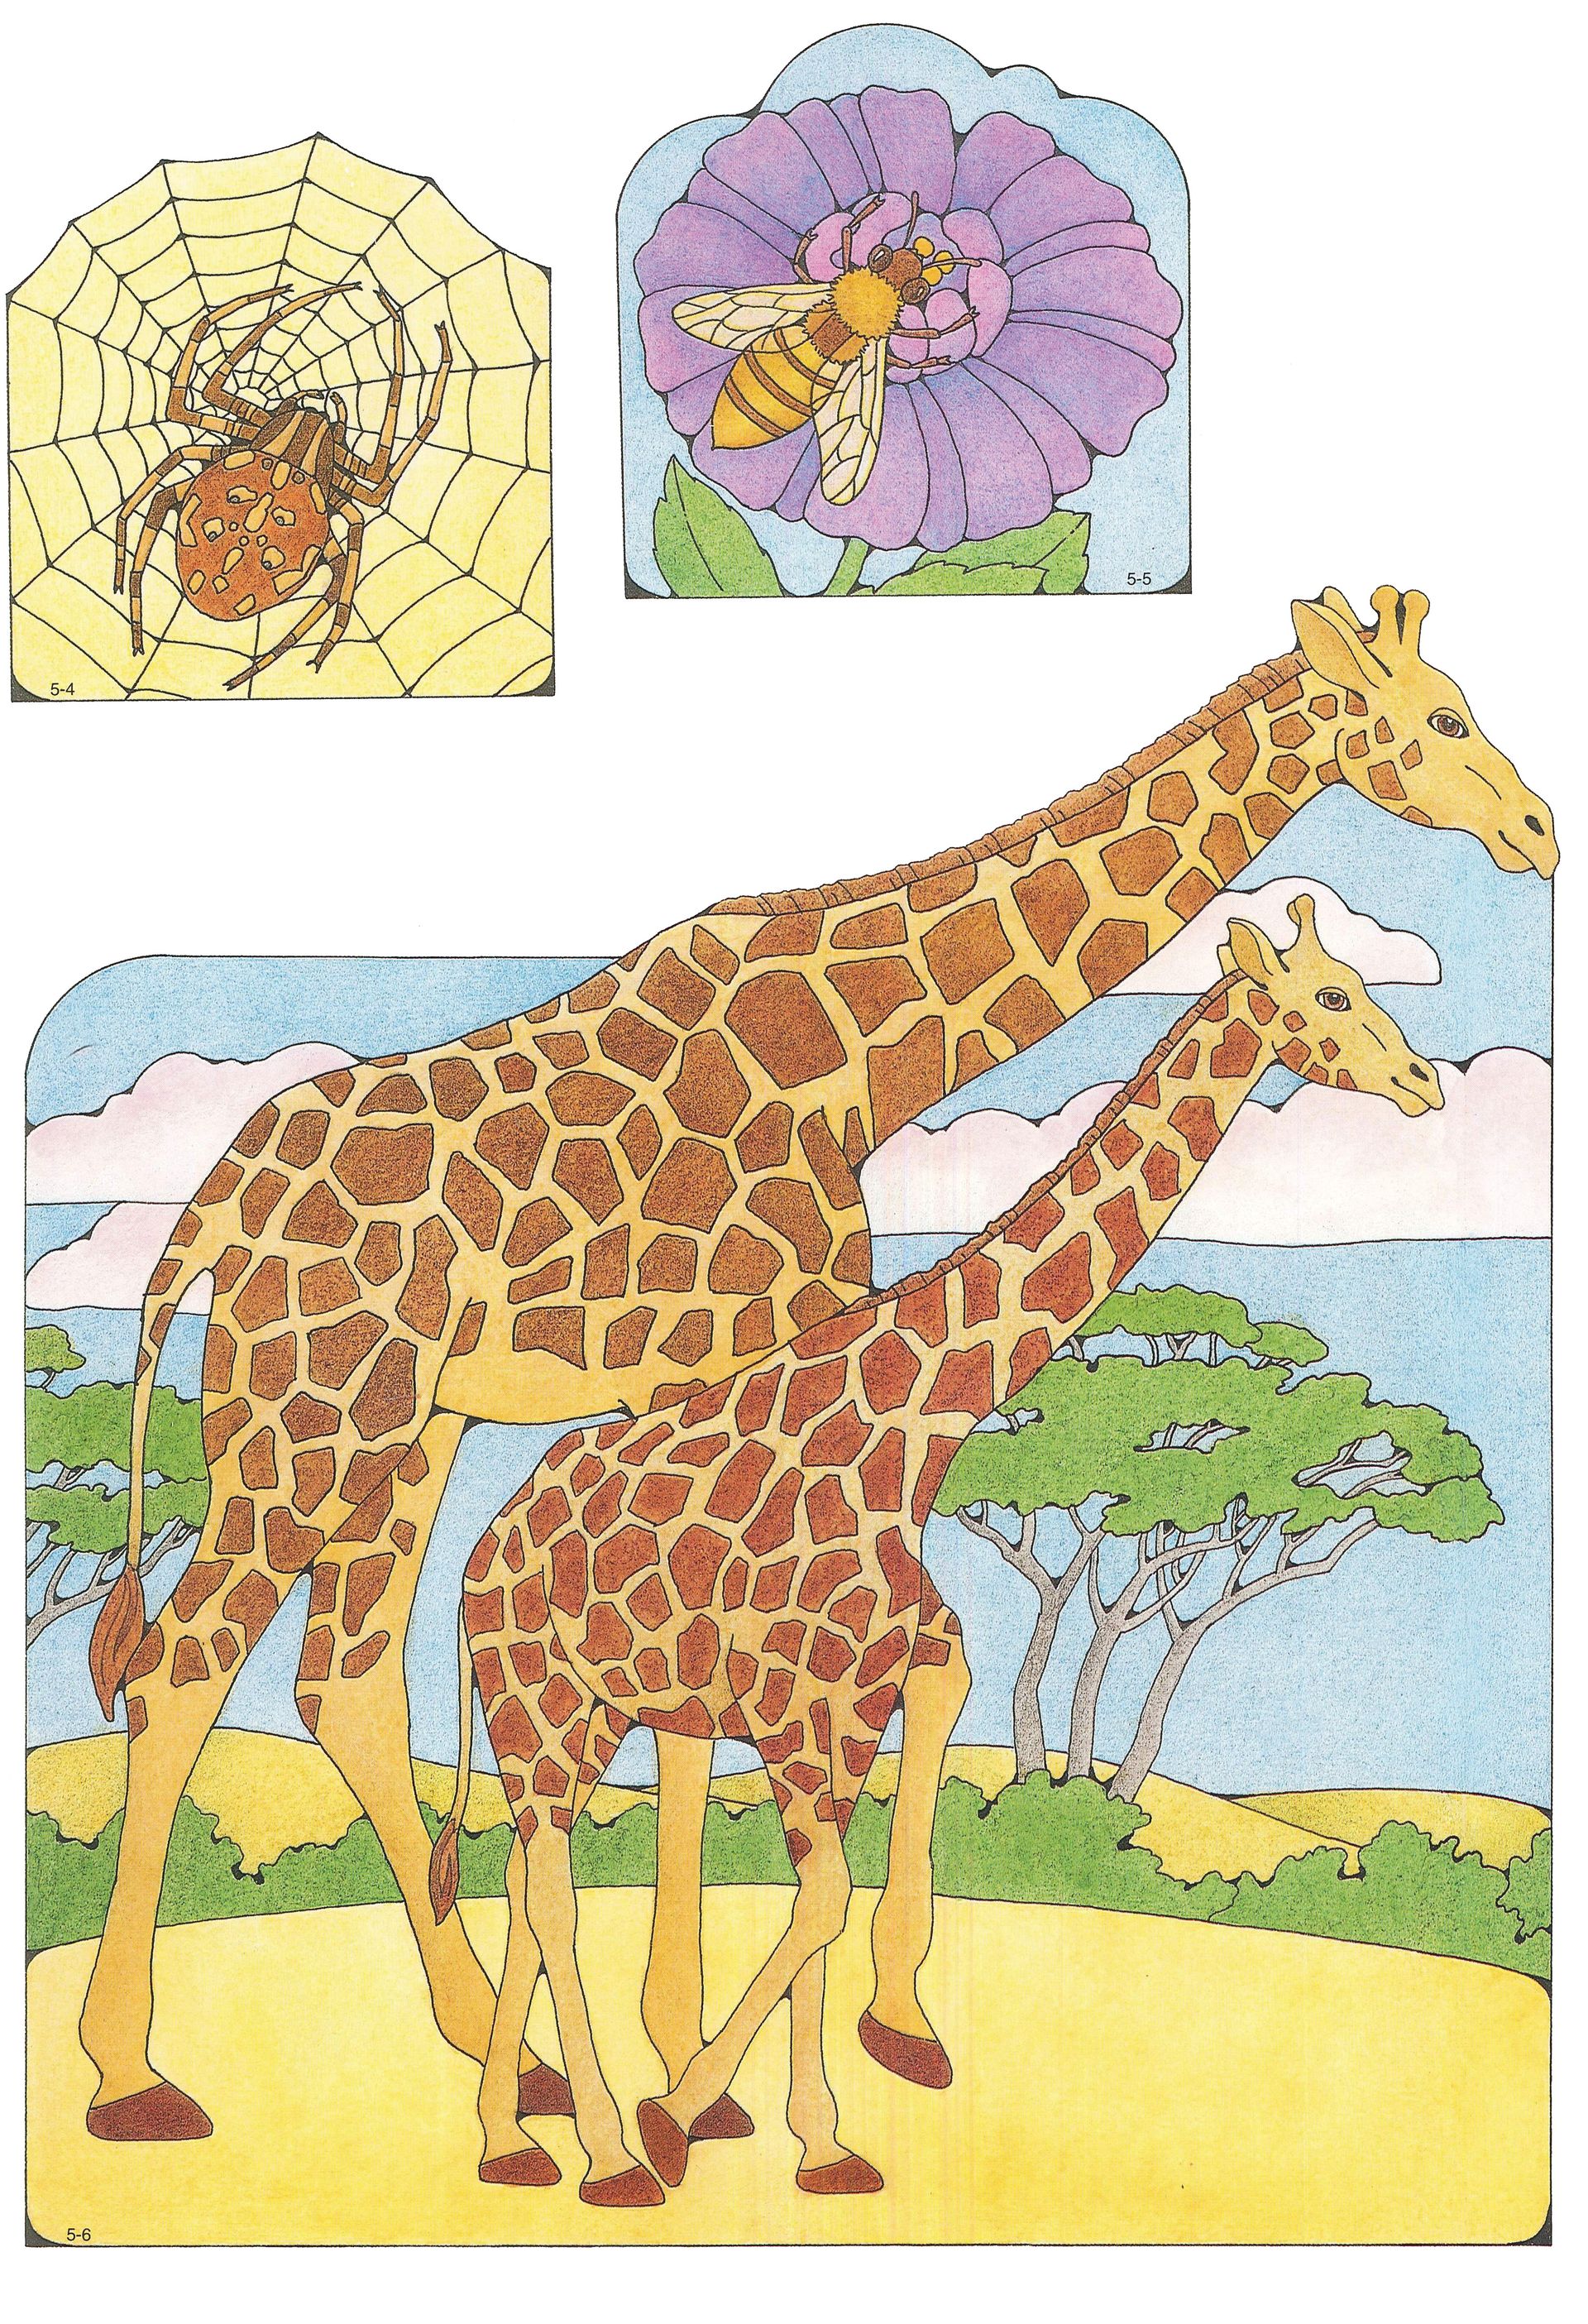 Primary Visual Aids: Cutouts 5-4, Spider; 5-5, Bee; 5-6, Mother and Baby Giraffe.